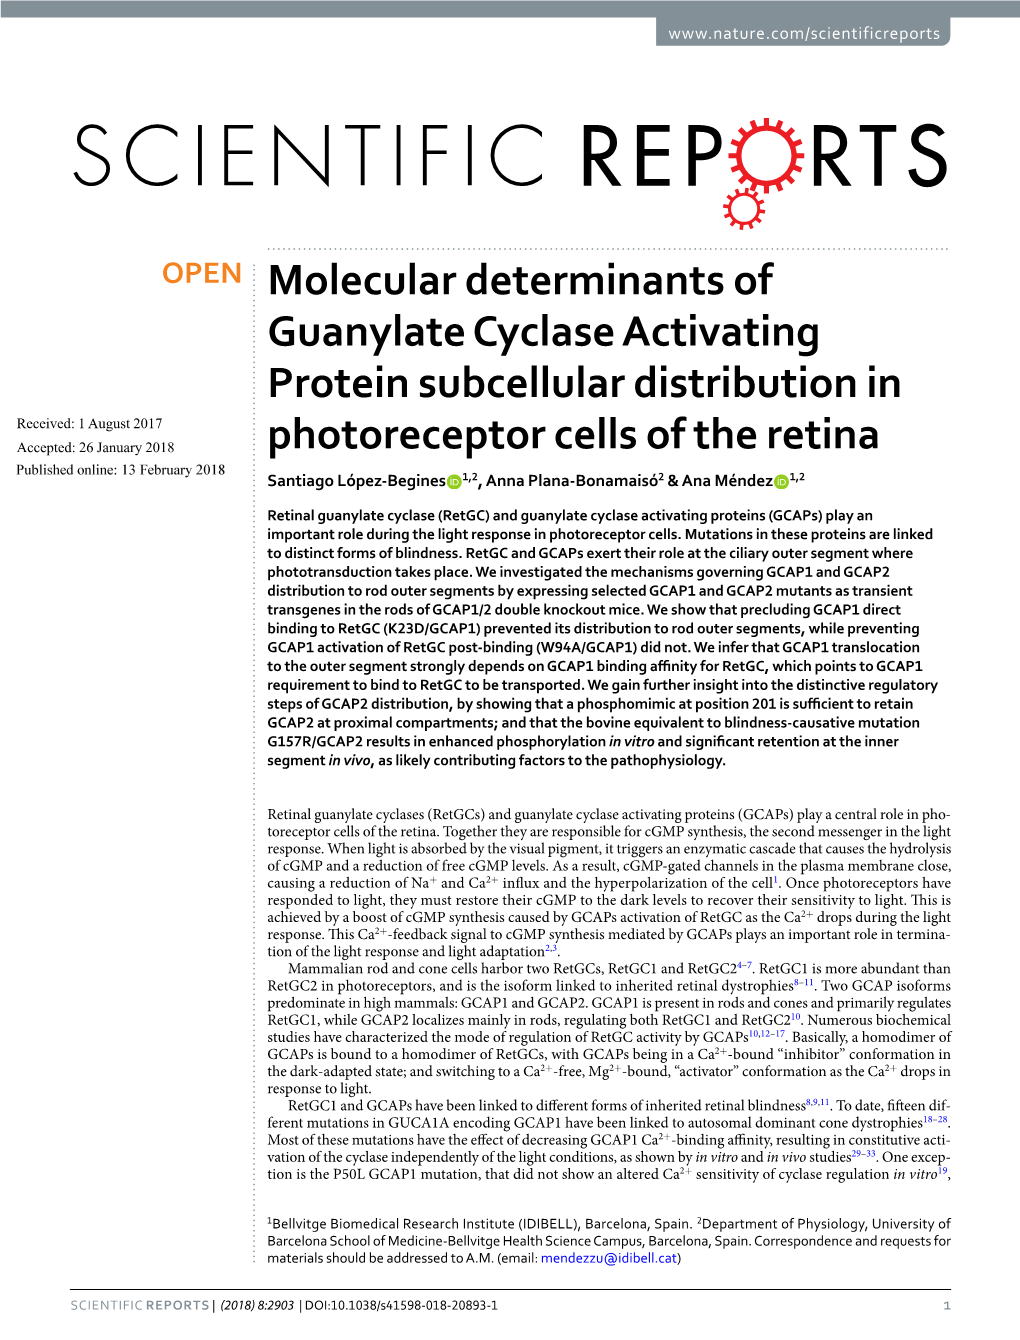 Molecular Determinants of Guanylate Cyclase Activating Protein